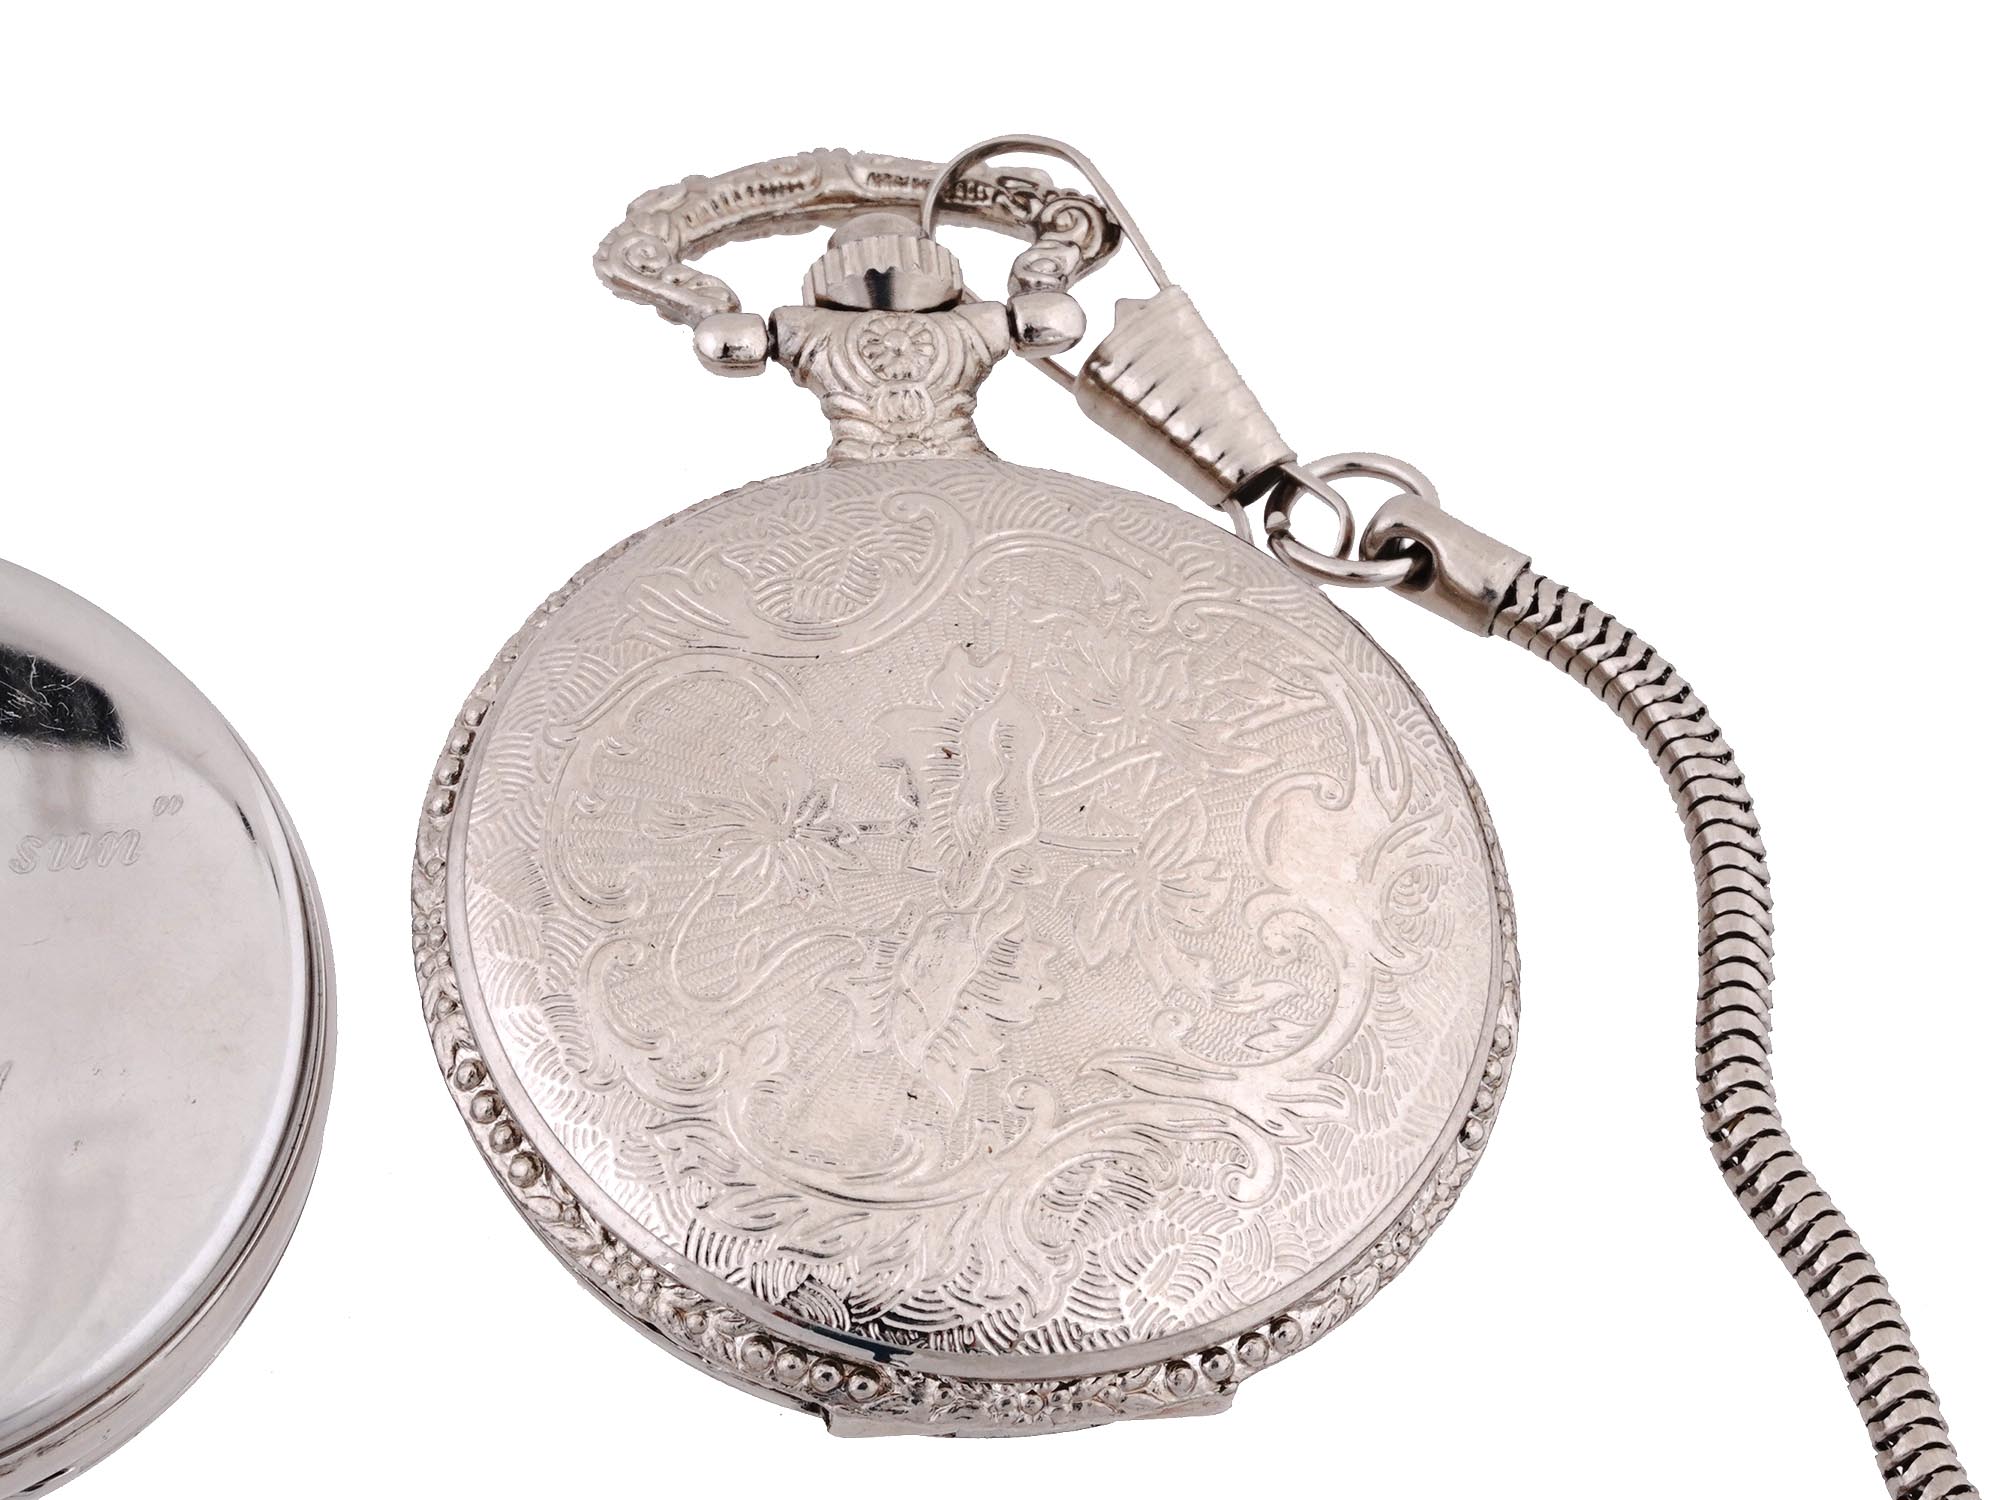 VINTAGE COLIBRI ZHONGFA POCKET WATCHES WITH CHAINS PIC-4